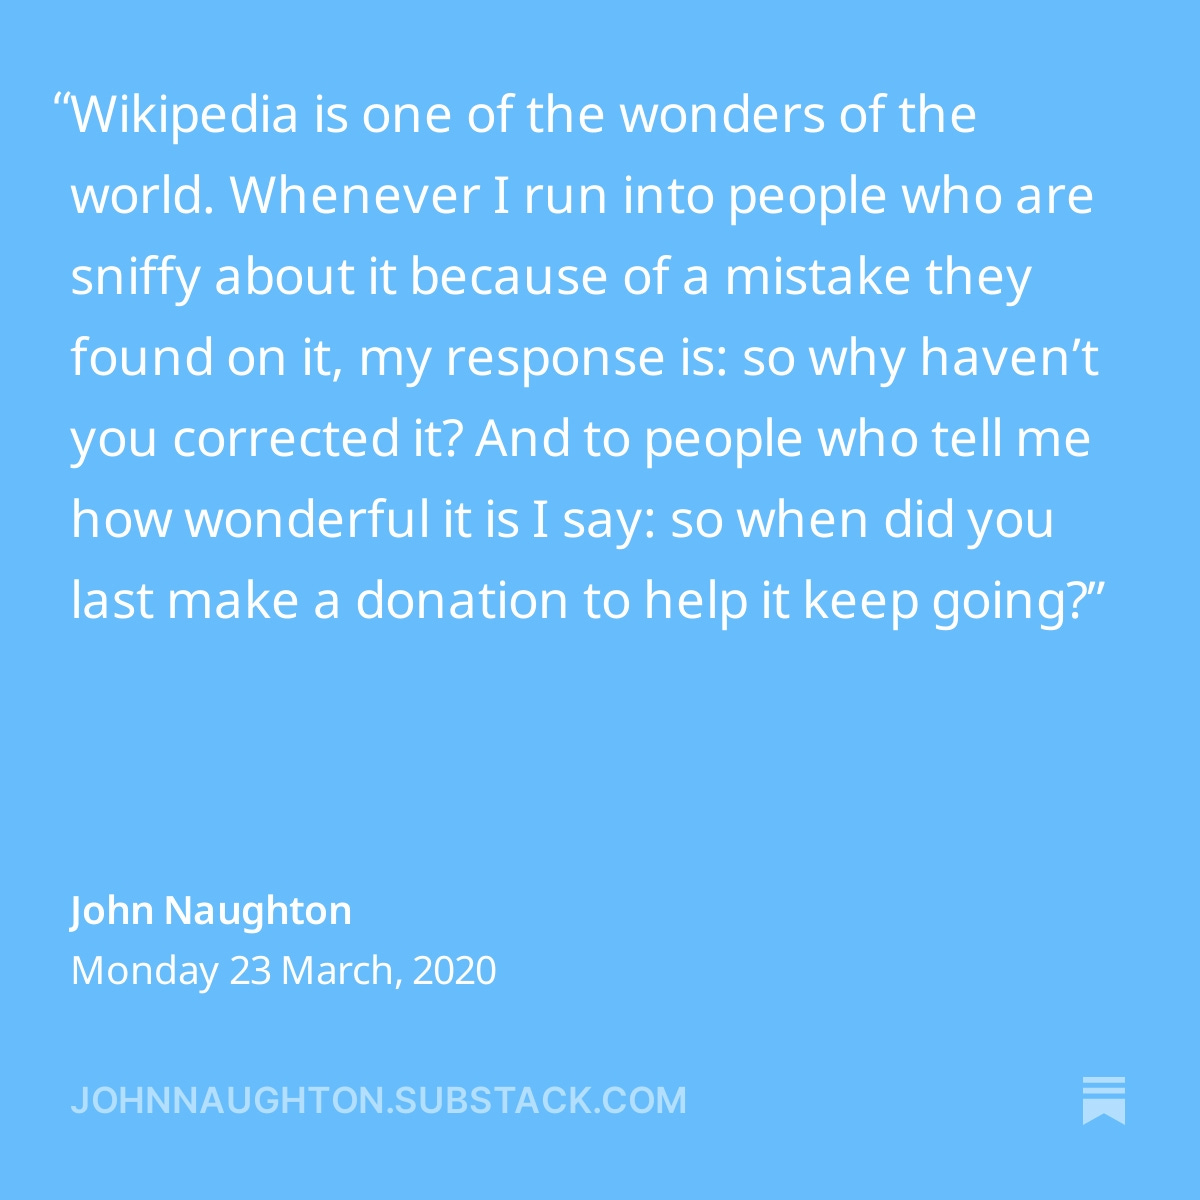 A screenshot from John Naughton’s post on Monday, 23 March, 2020 on johnnaughton.substack.com: “Wikipedia is one of the wonders of the world. Whenever I run into people who are sniffy about it because of a mistake they found on it, my response is: so why haven’t you corrected it? And to people who tell me how wonderful it is I say: so when did you last make a donation to help it keep going?”